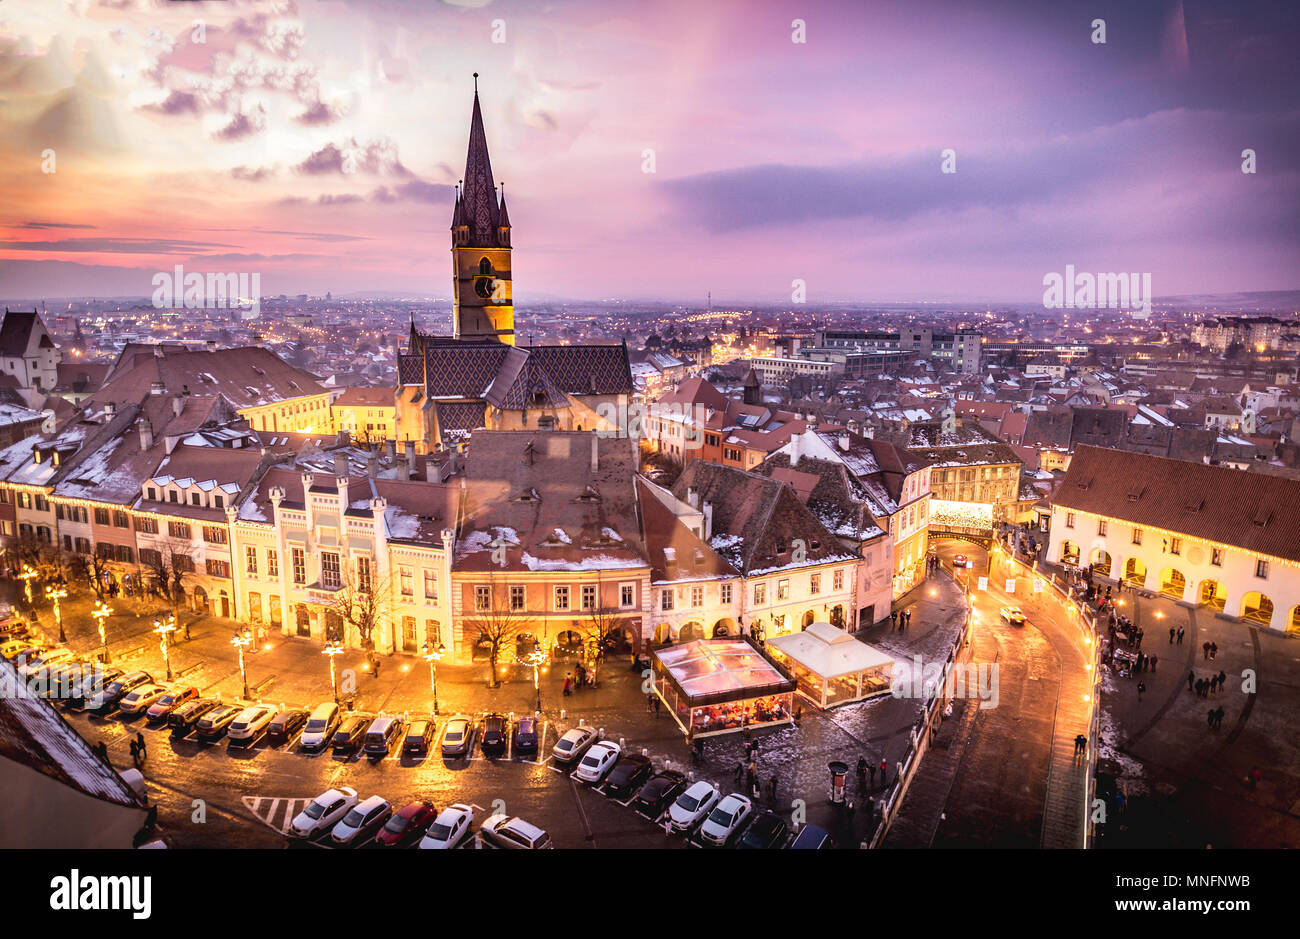 Sunset In Sibiu Hermannstadt Romania Stock Photo, Picture and